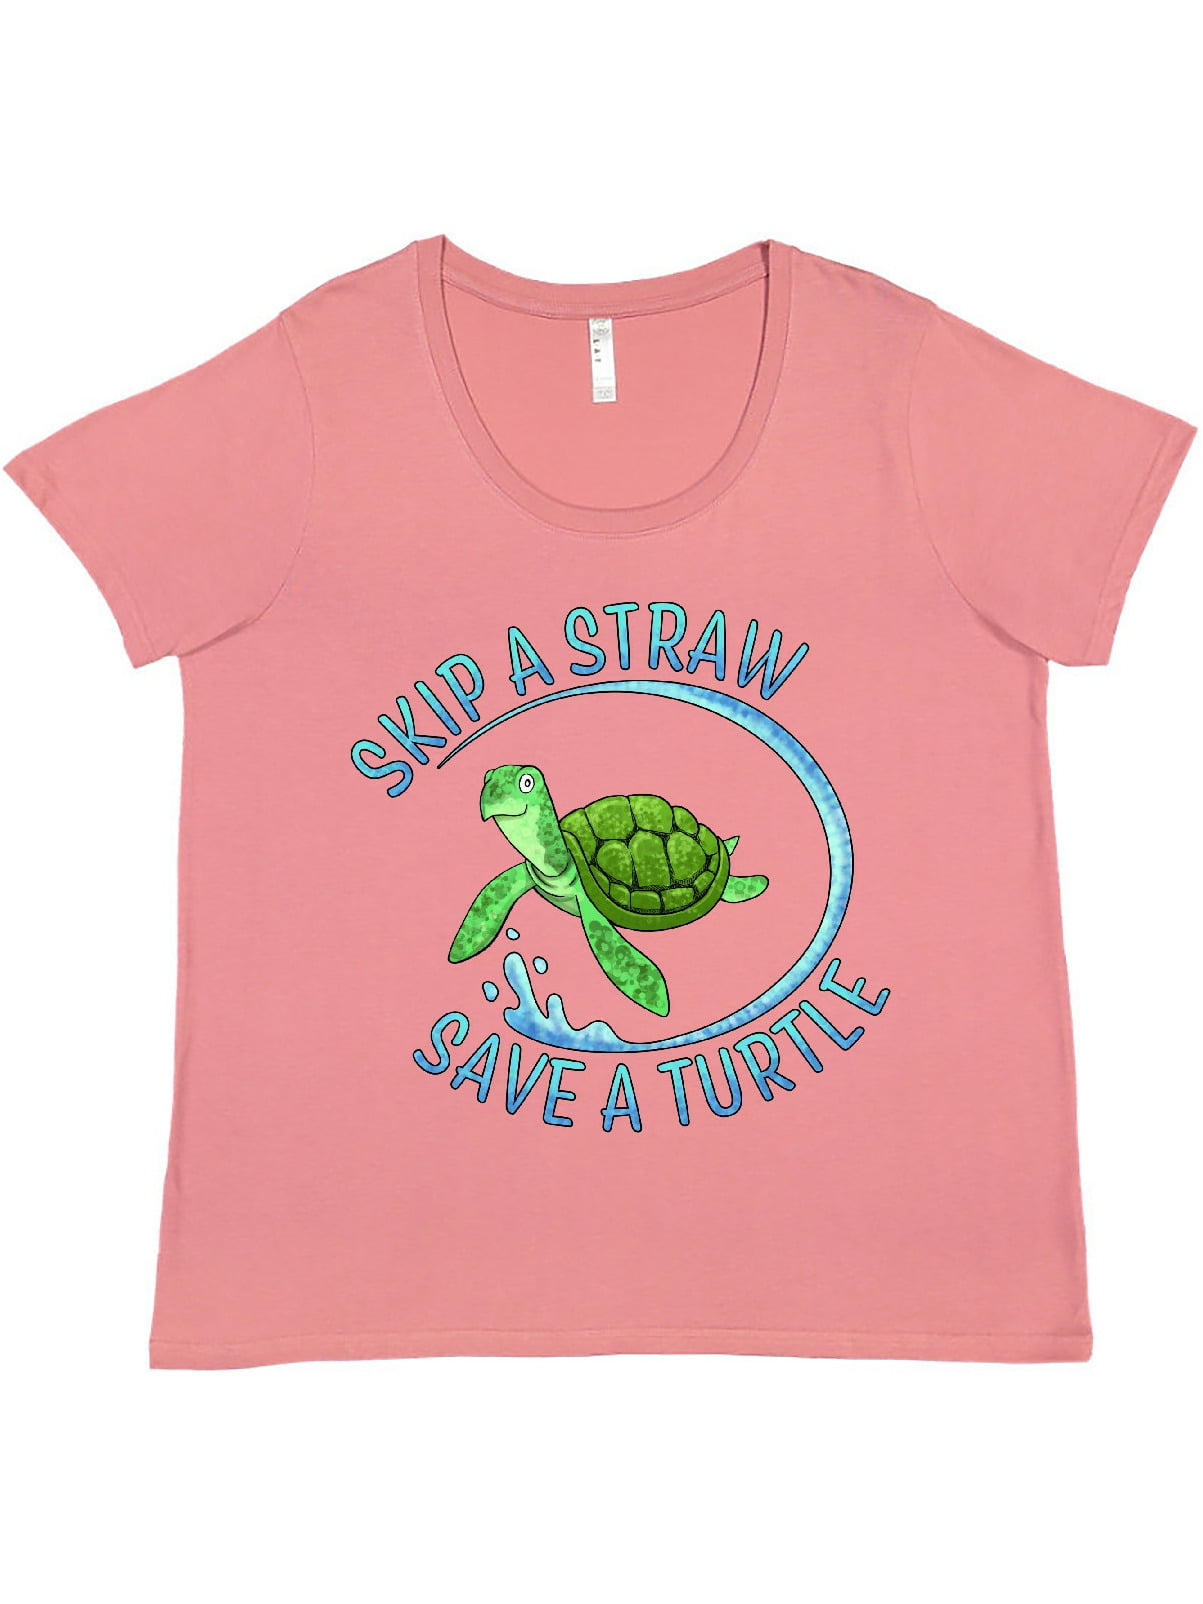 Skip A Straw Save A Turtle Shirt Save The Turtles T-Shirt Men's Short Sleeve Tee